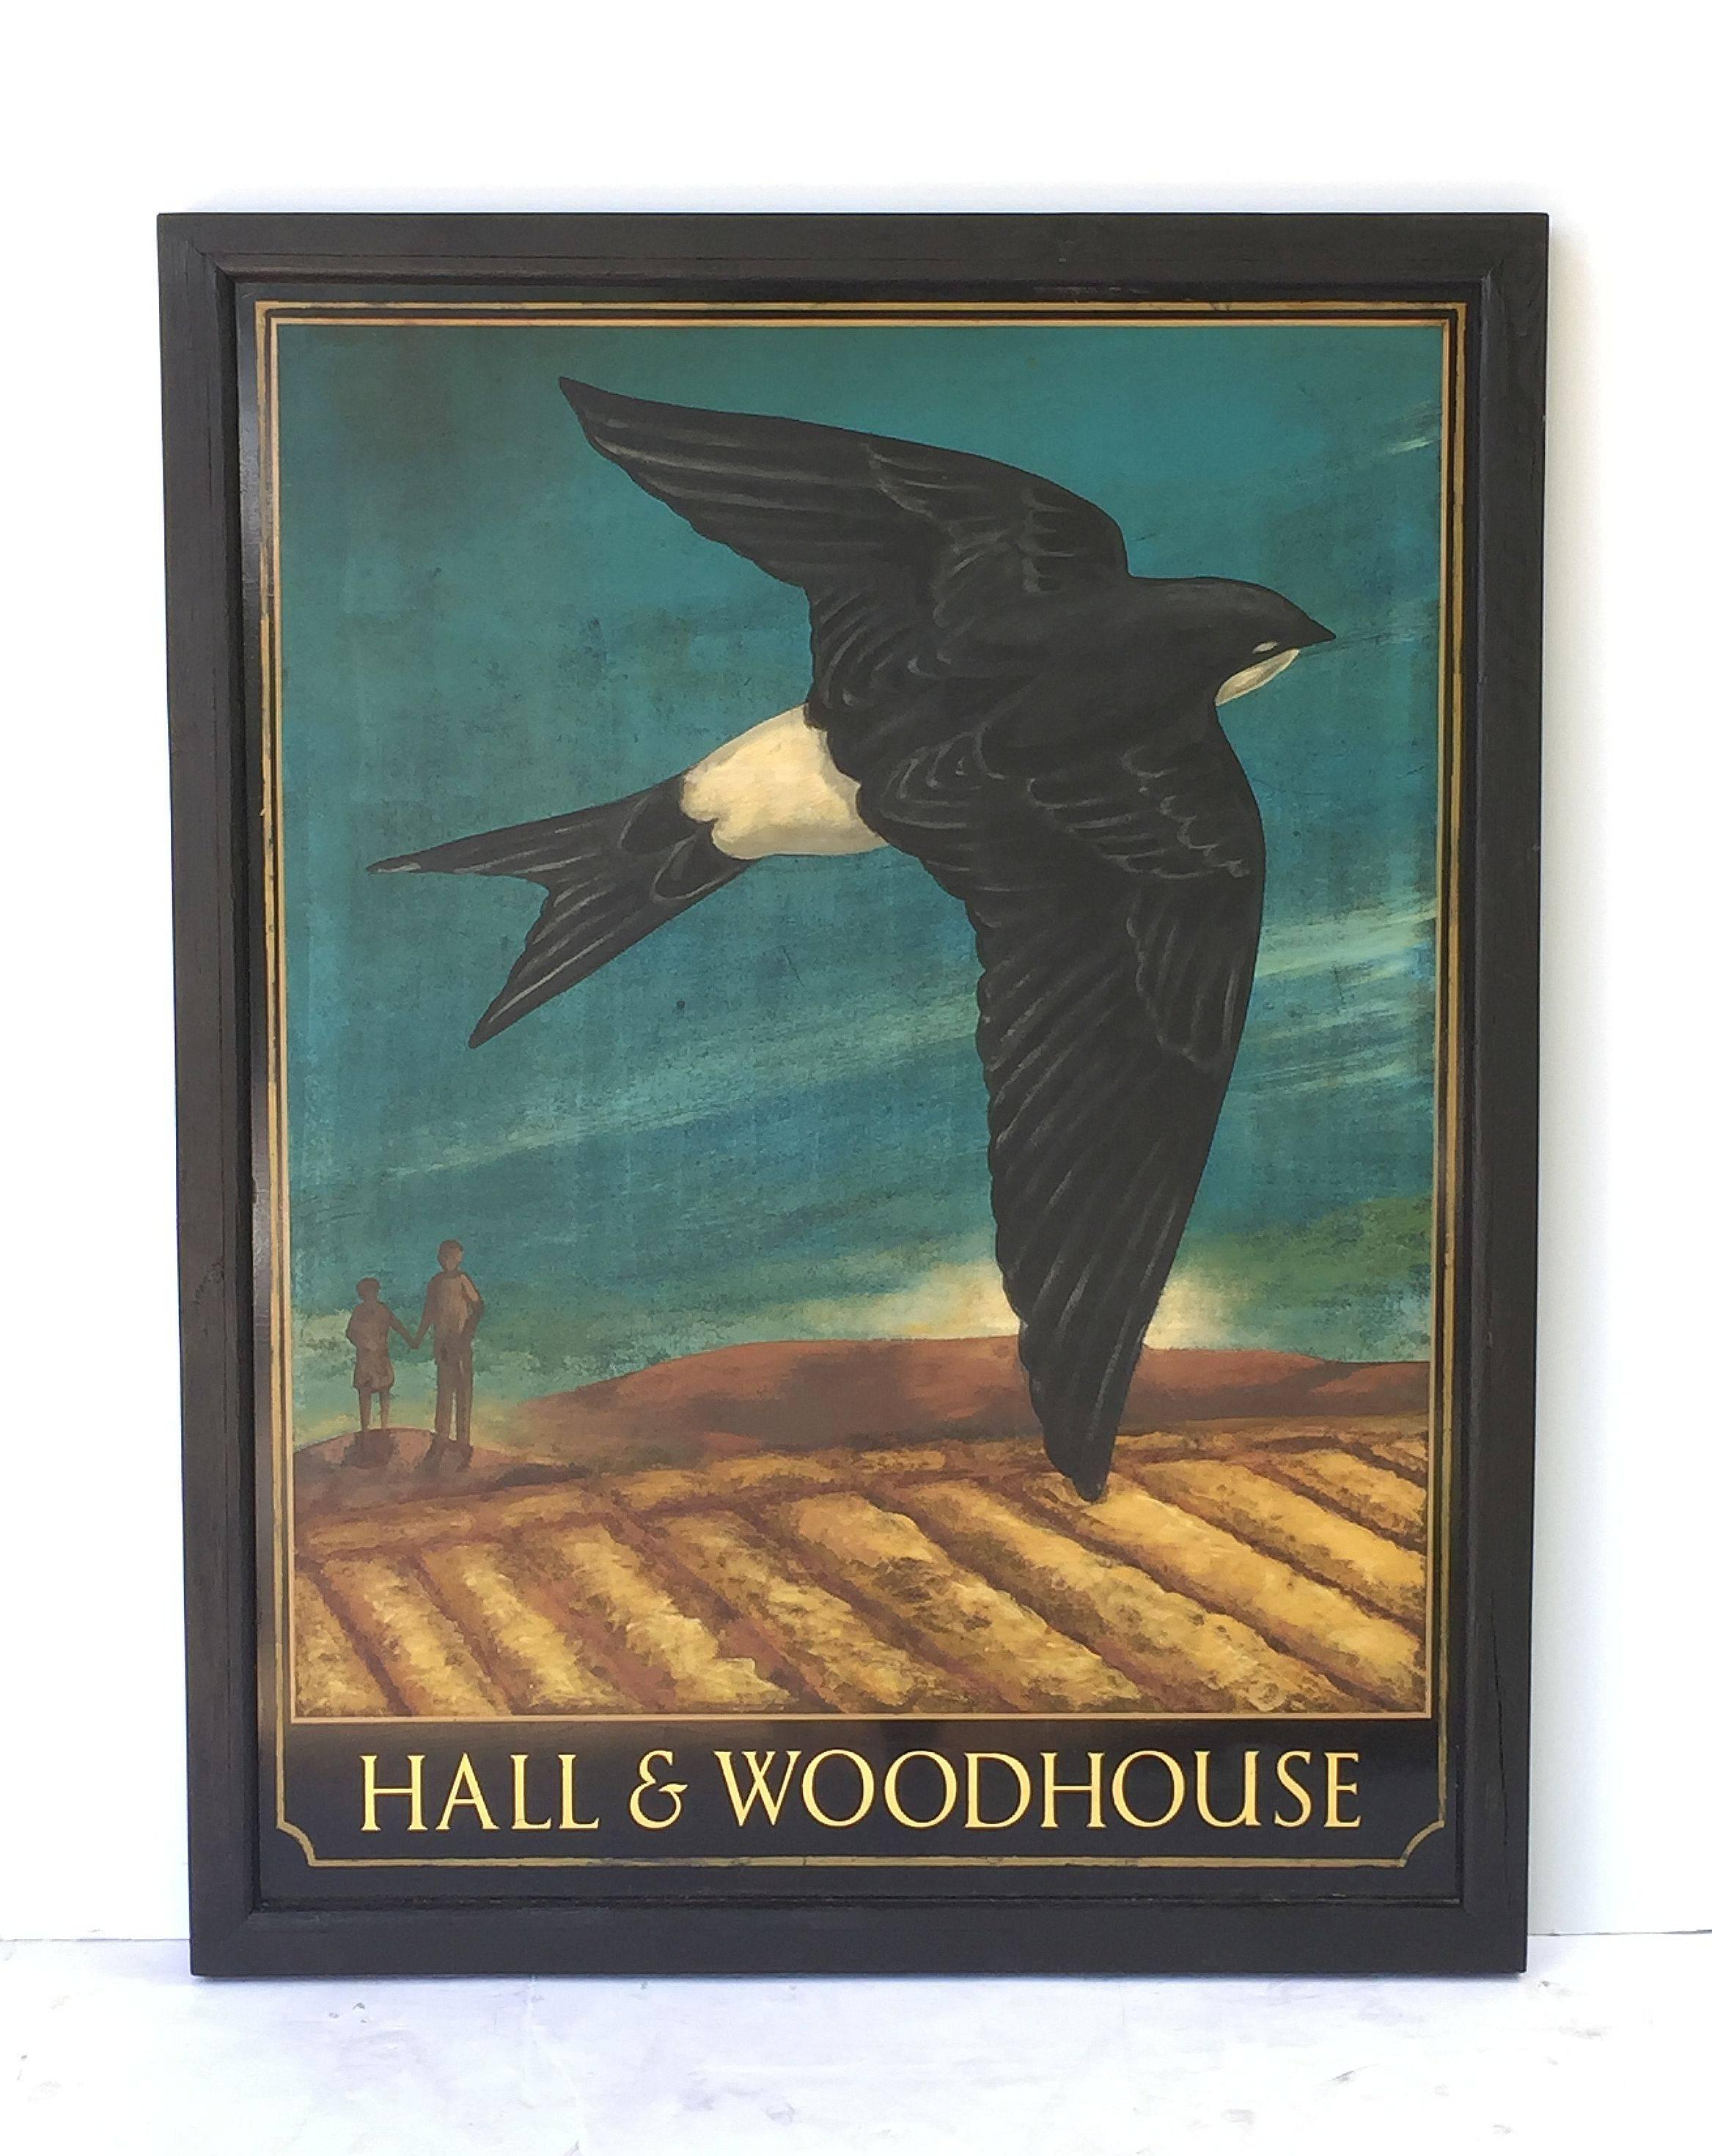 An authentic English pub sign (one-sided) featuring a painting of a swallow bird flying above a landscape with two figures in the background, entitled: Hall & Woodhouse

Hall and Woodhouse is a British regional brewery founded in 1777 by Charles